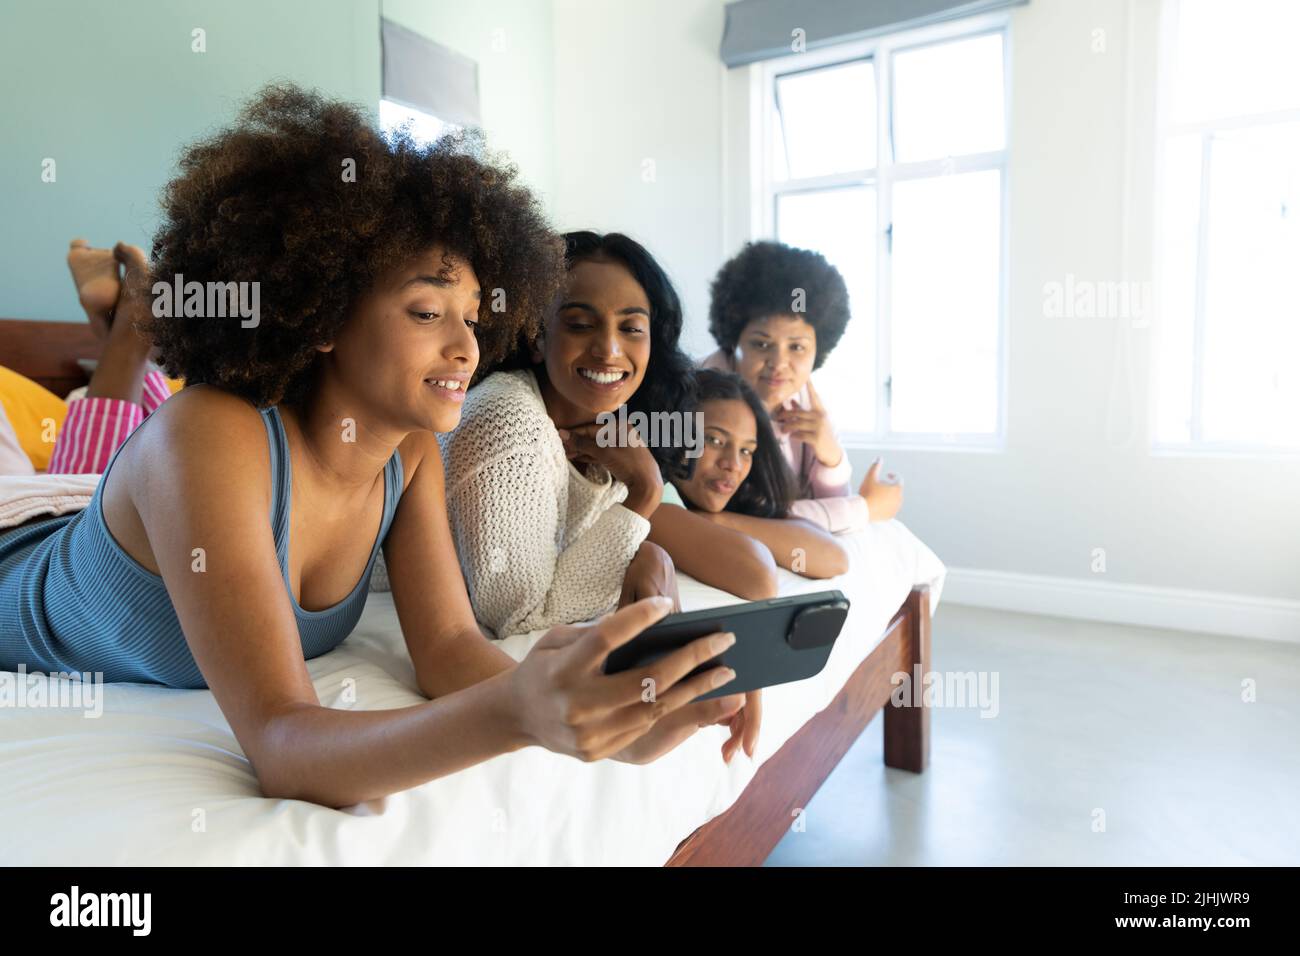 Biracial woman with afro hair taking selfie over cellphone with friends lying side by side on bed Stock Photo